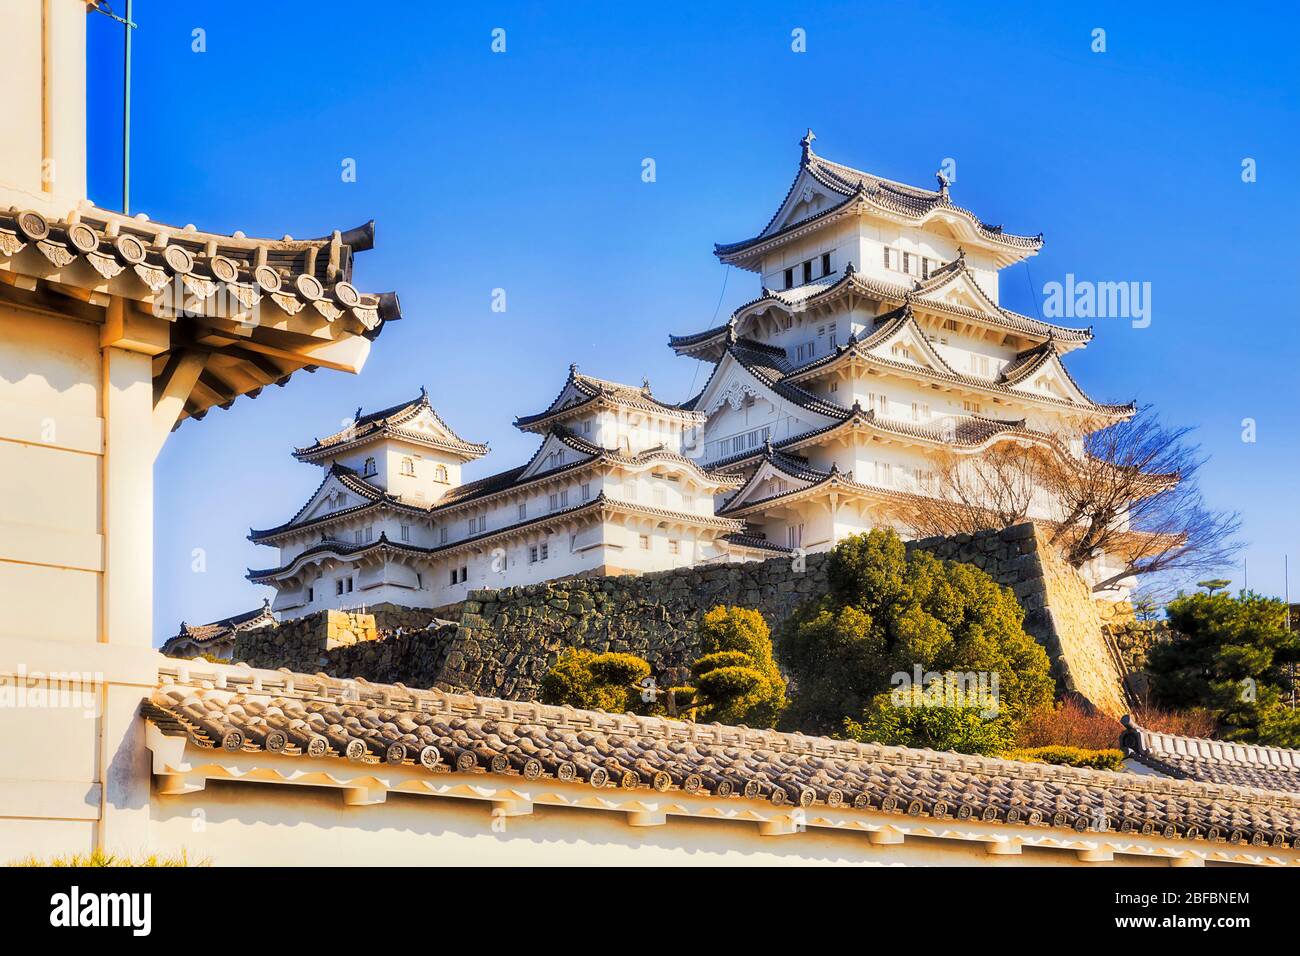 Main white tower and palace over tall stone walls in Himeji park - traditional japanese architecture. Stock Photo